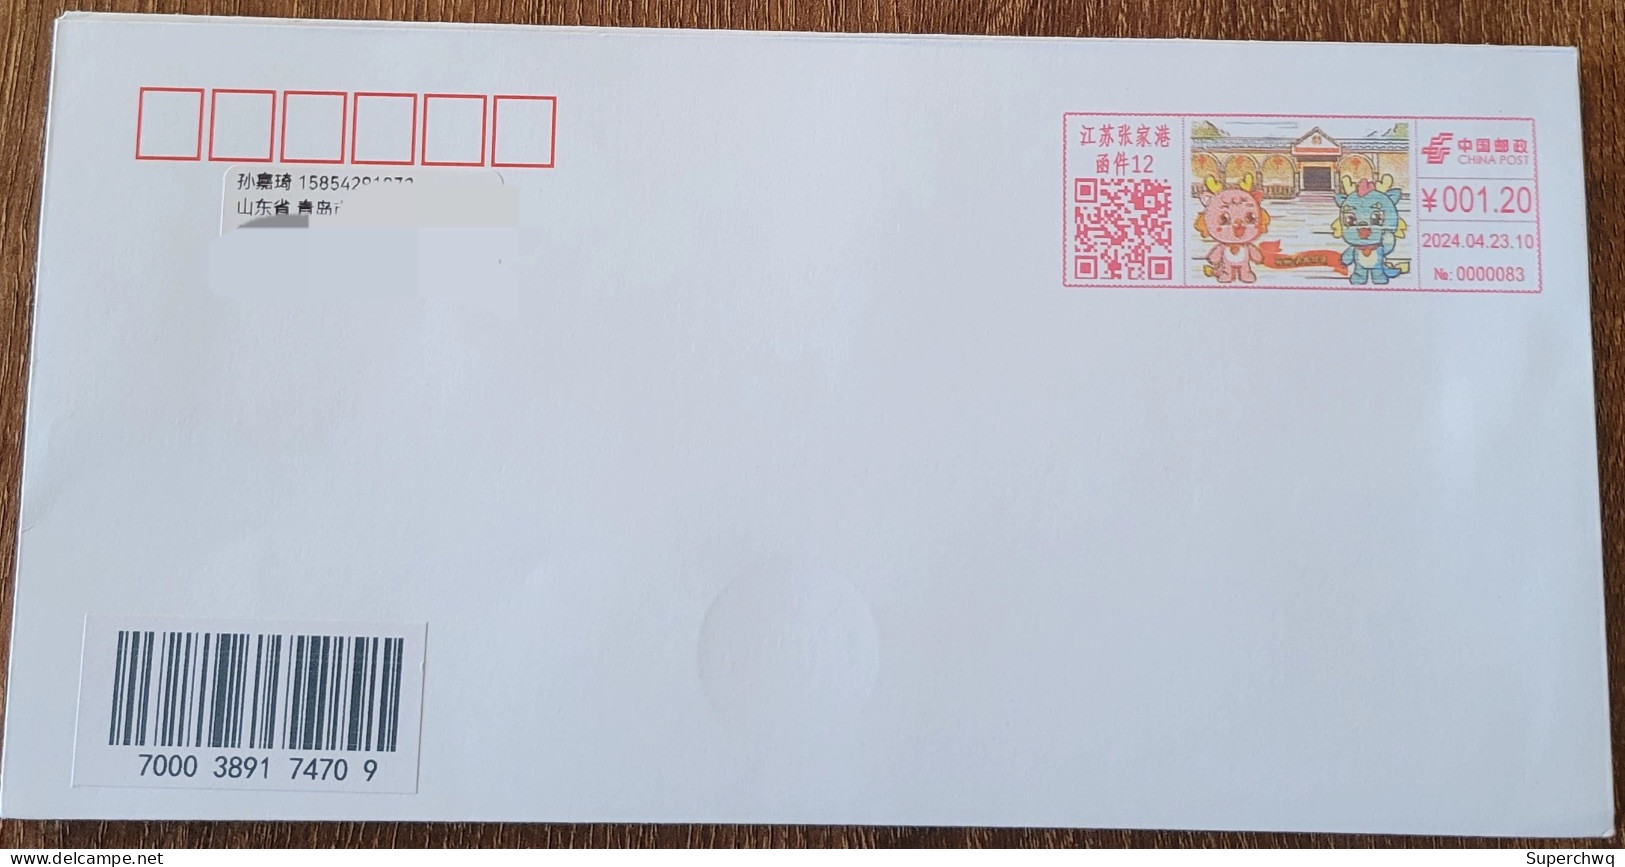 China Cover "Qinglong Community" (Zhangjiagang, Jiangsu) Colored Postage Machine Stamp First Day Actual Delivery Seal - Enveloppes